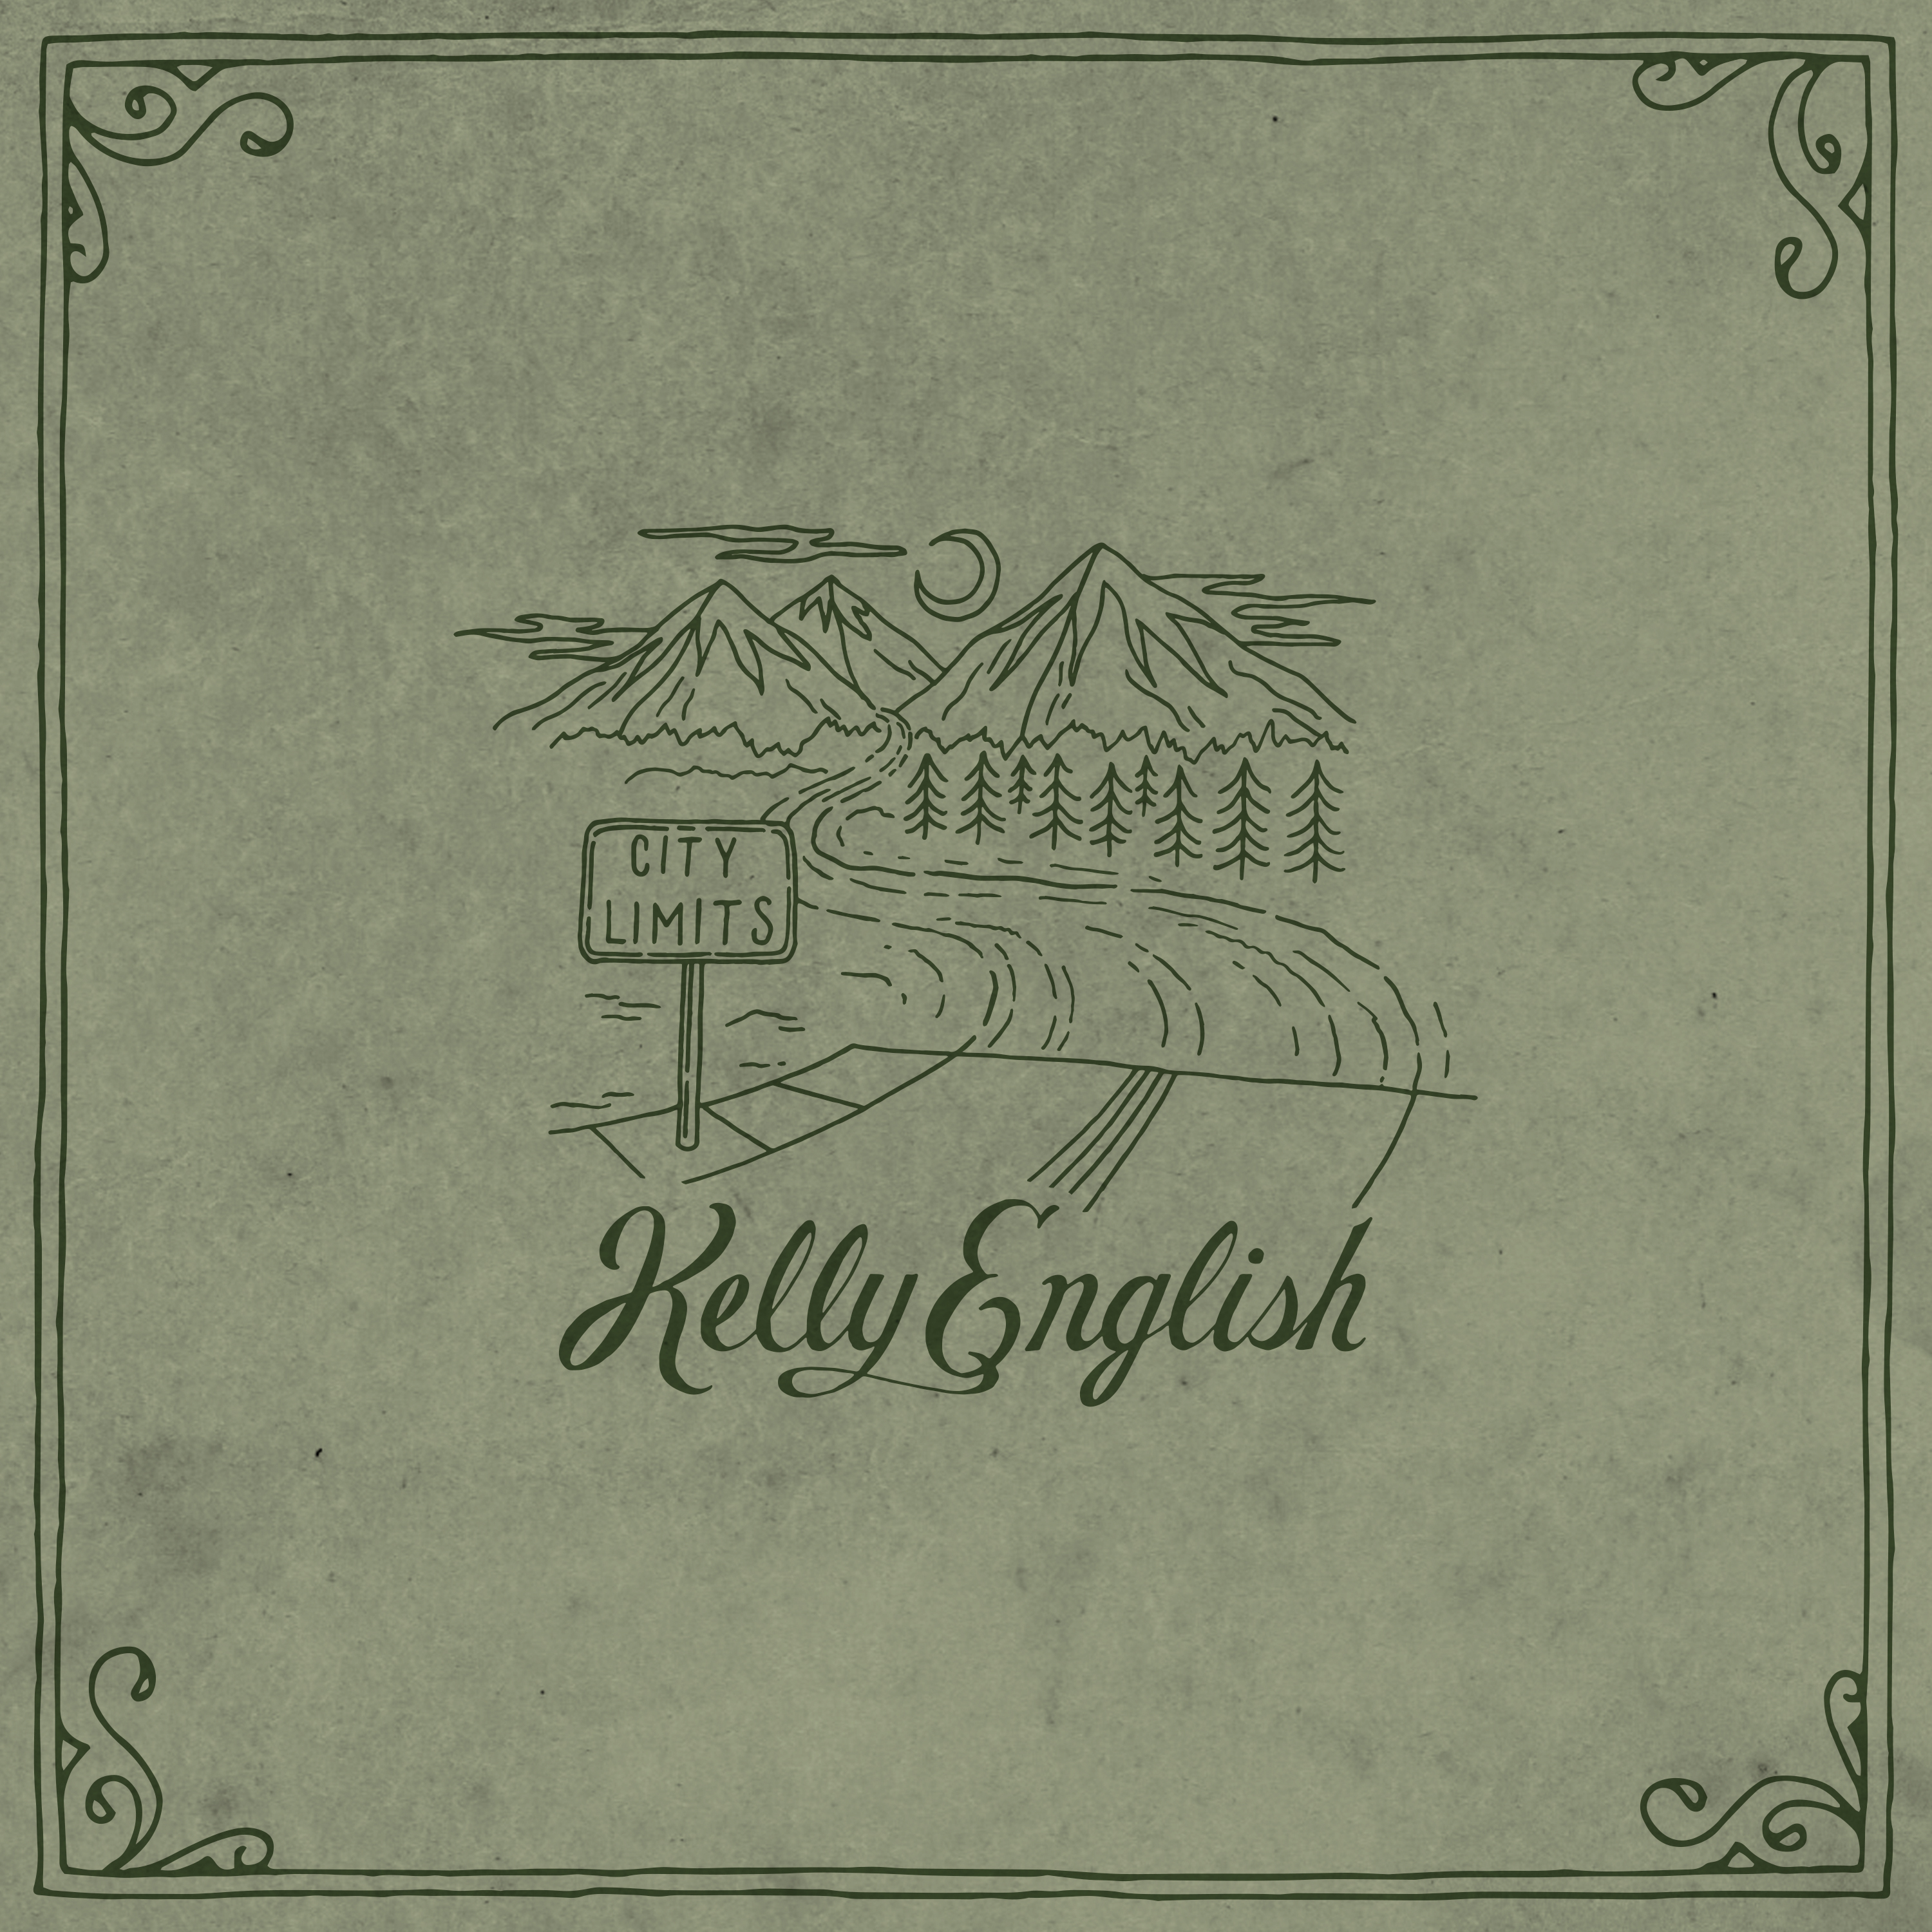 Debut album by Kelly English